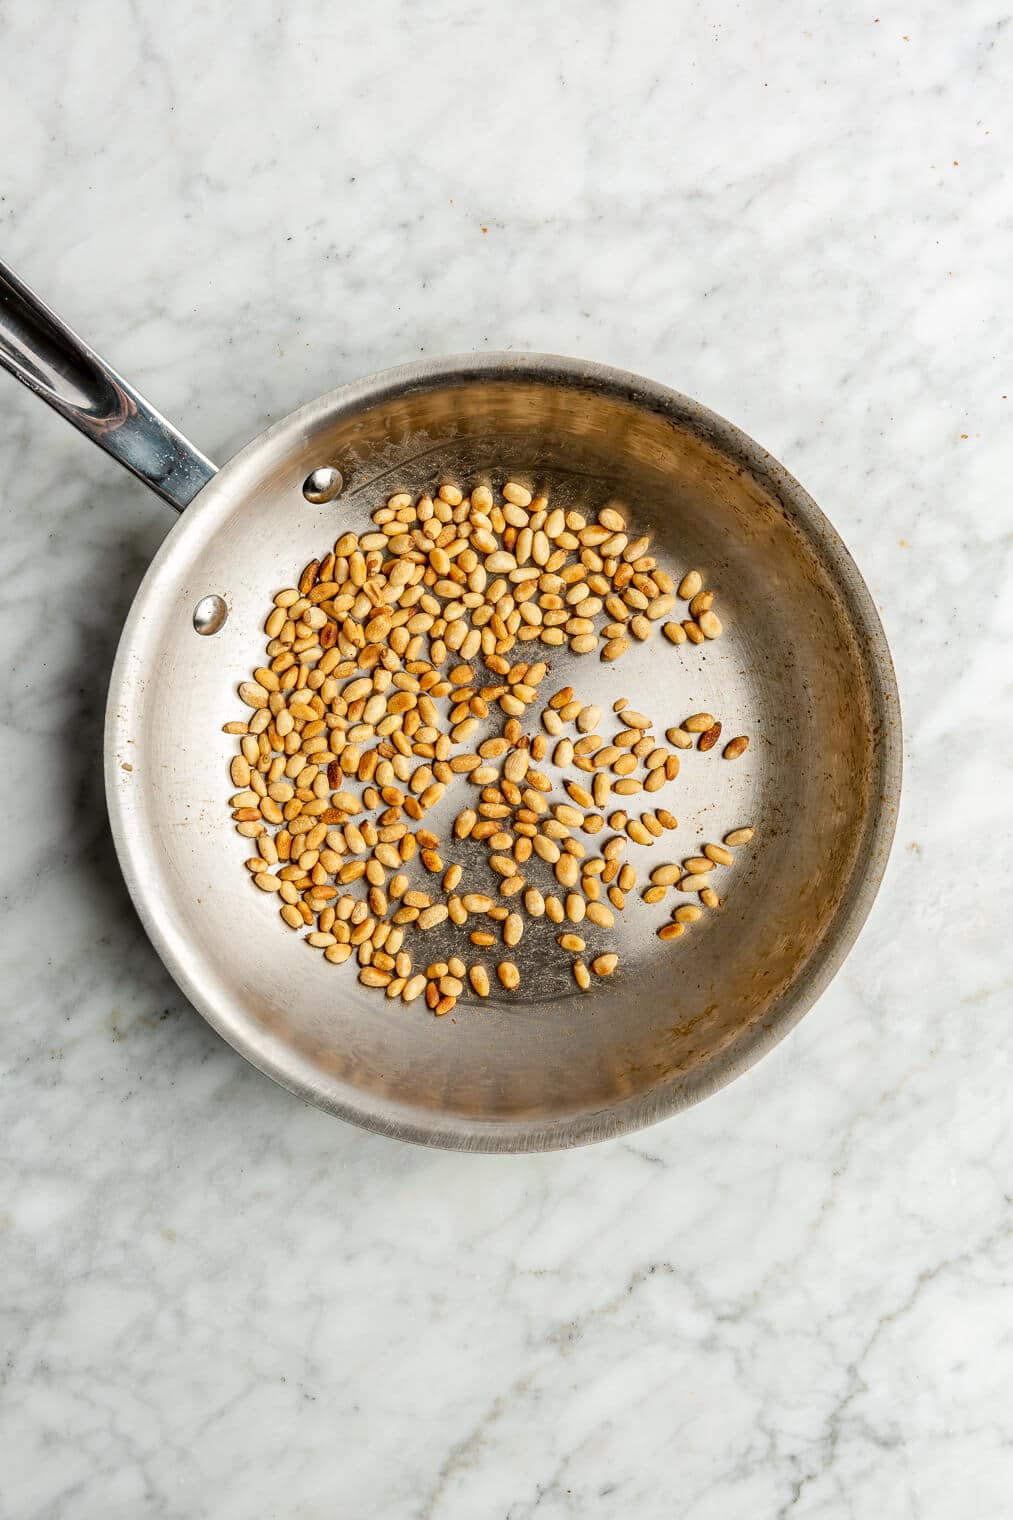 Pine nuts toasted in a small stainless steel pan.